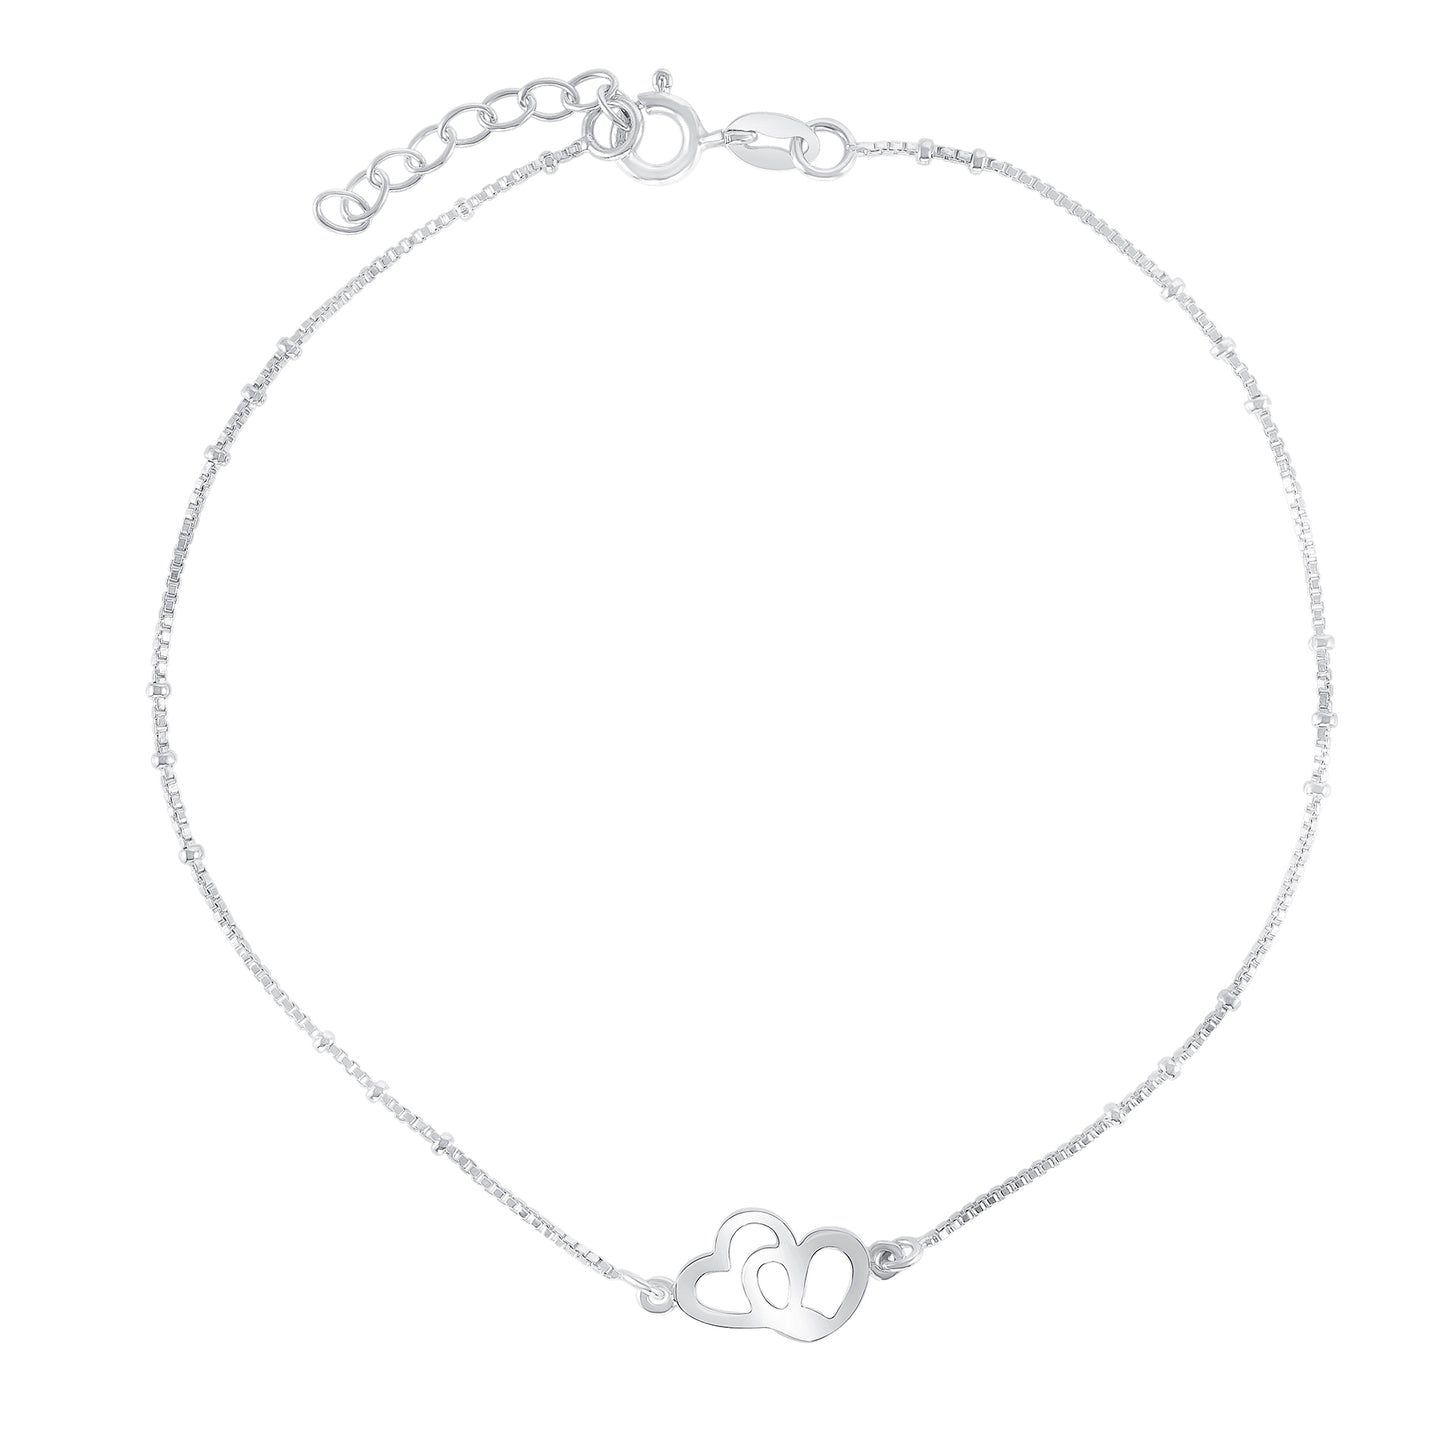 ANK01. Silver 925 Rhodium Plated 2 Hearts Anklet